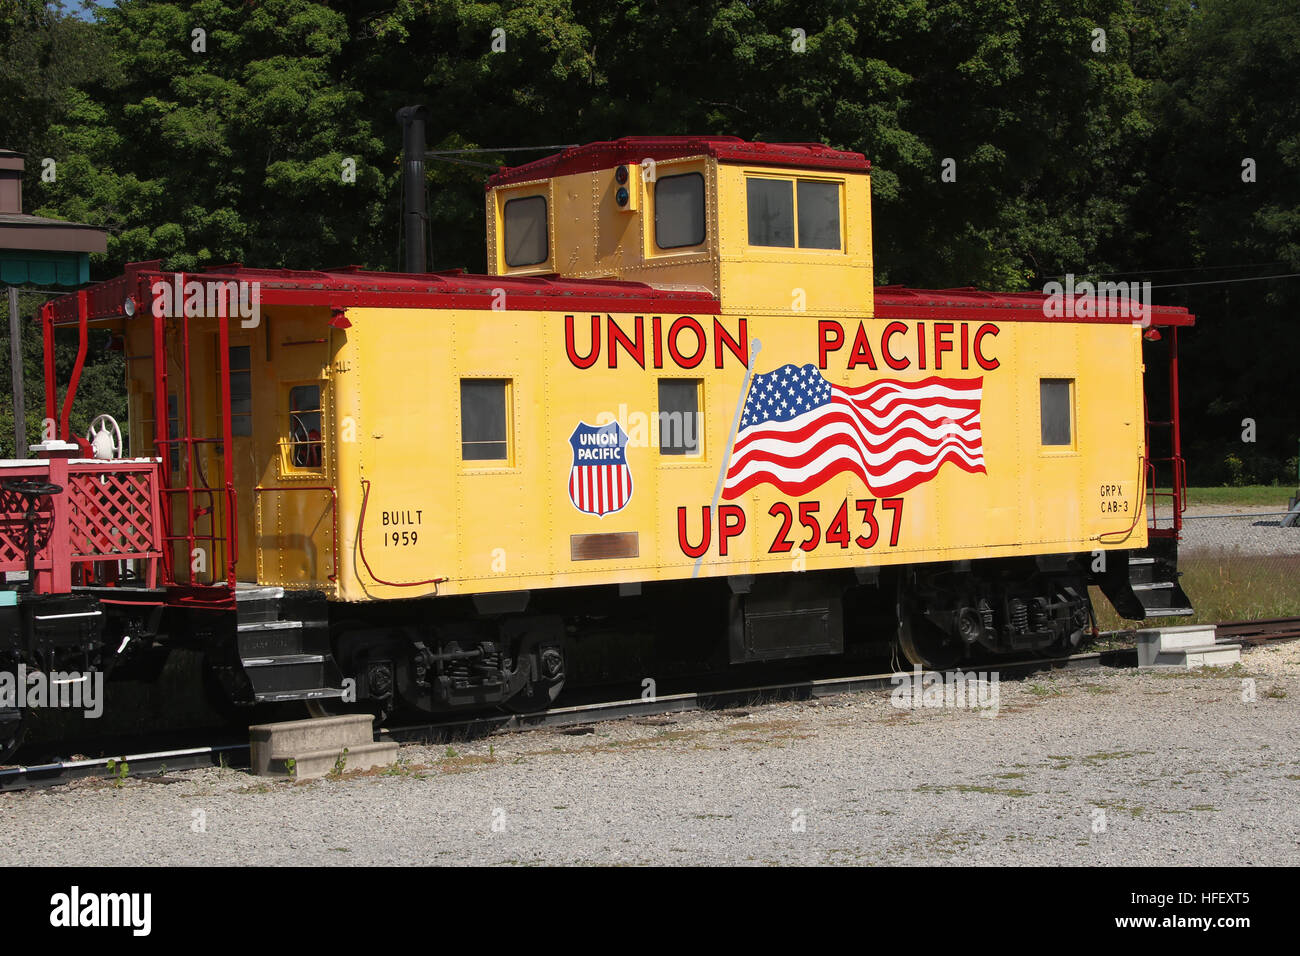 Union Pacific Caboose. Jusqu'25437. Greenville Railroad Park and Museum. Greenville, South Carolina, USA. Banque D'Images